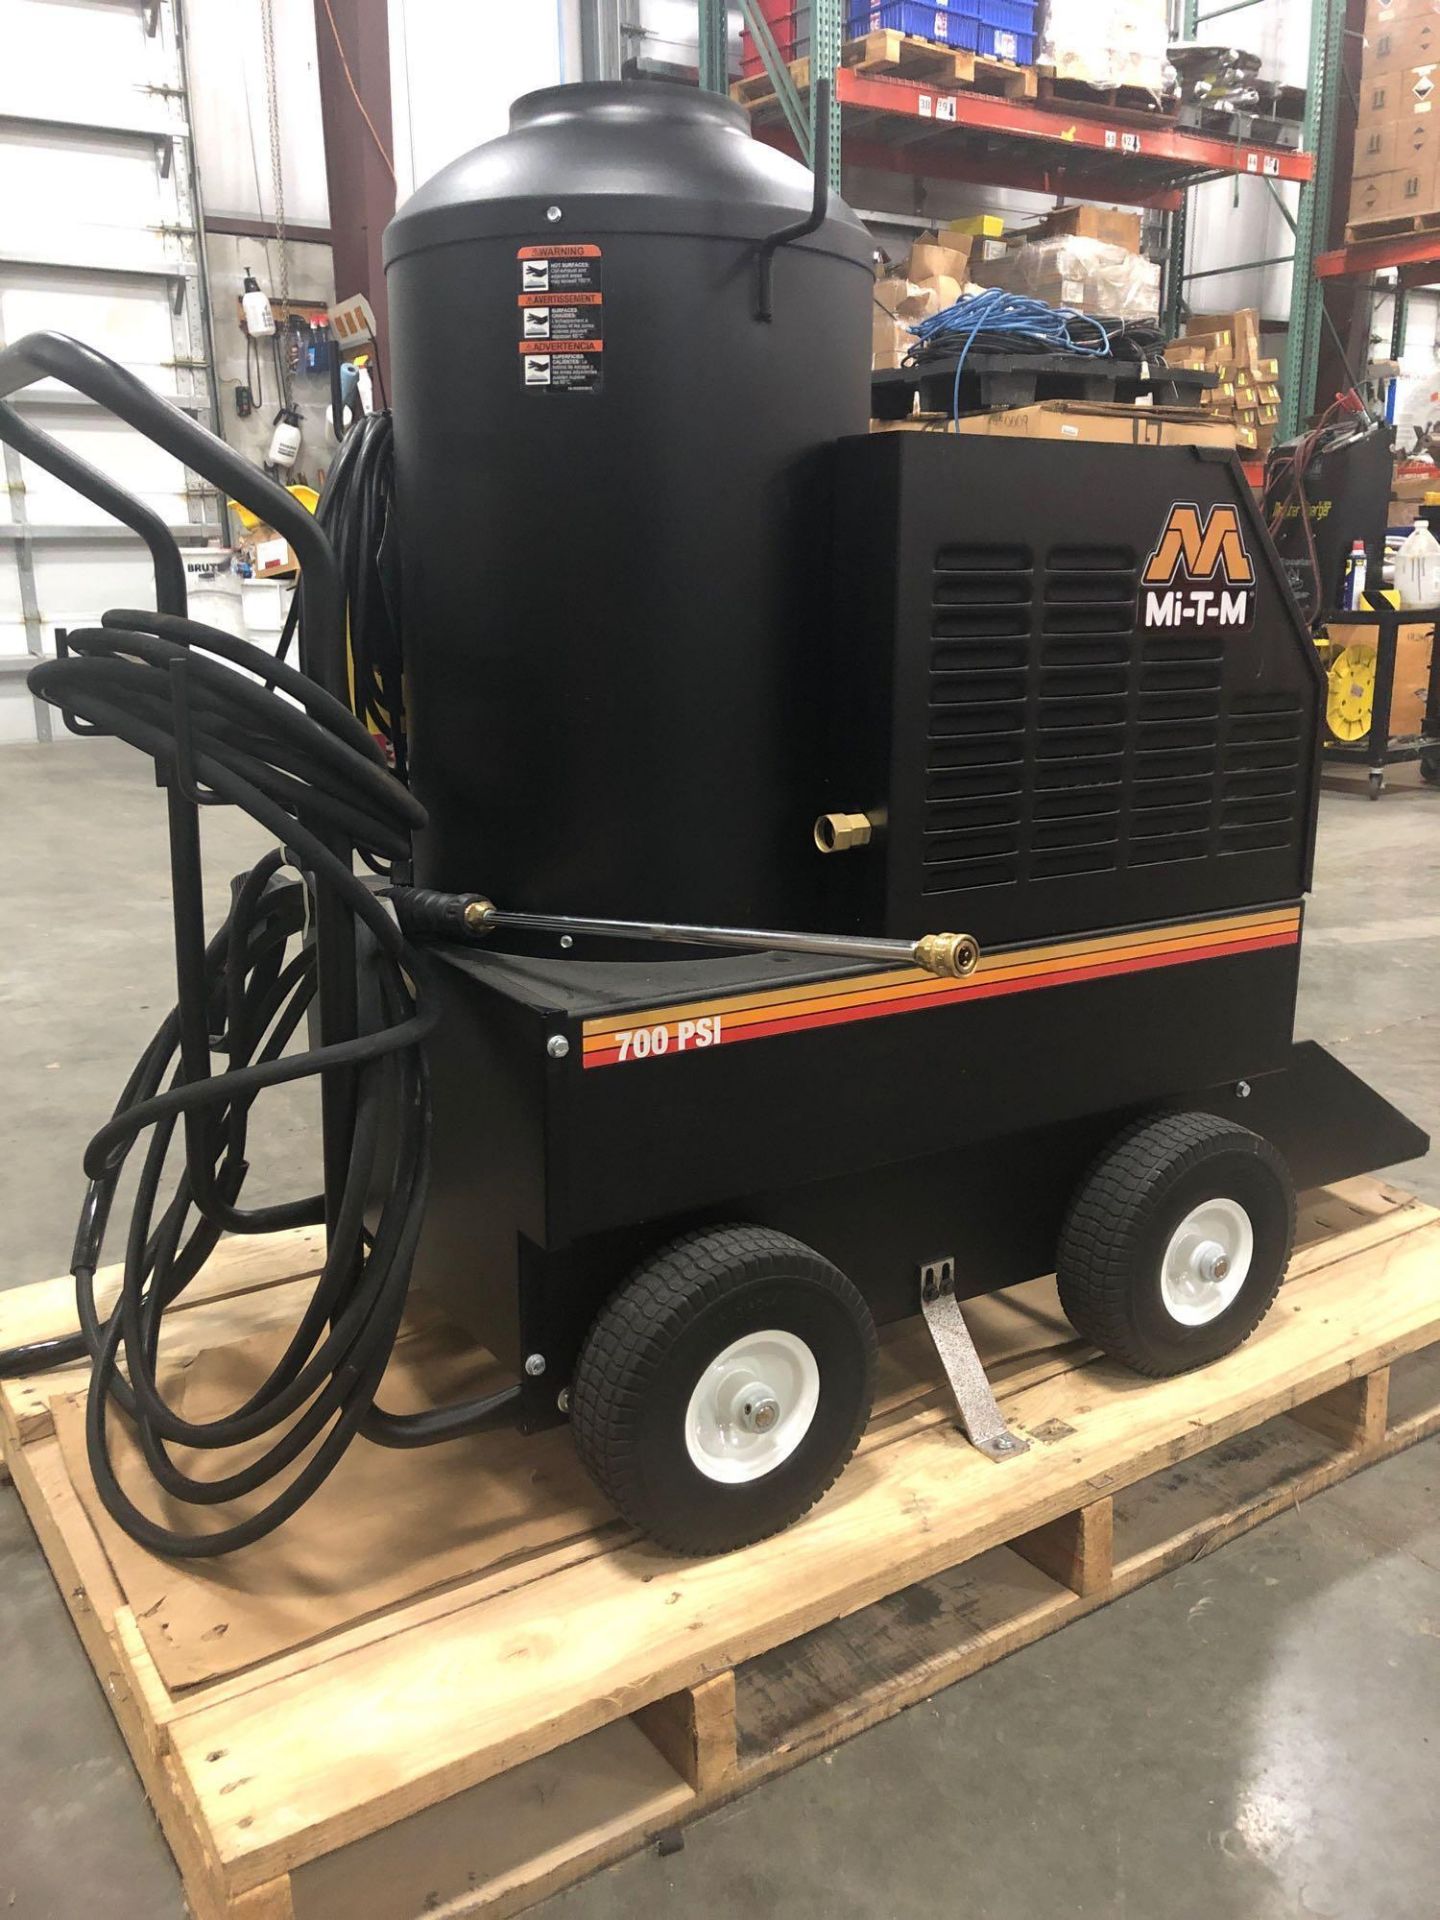 NEW MI-T-M 700 PSI HEATED PRESSURE WASHER MODEL GH-0703-LS10 - Image 4 of 4